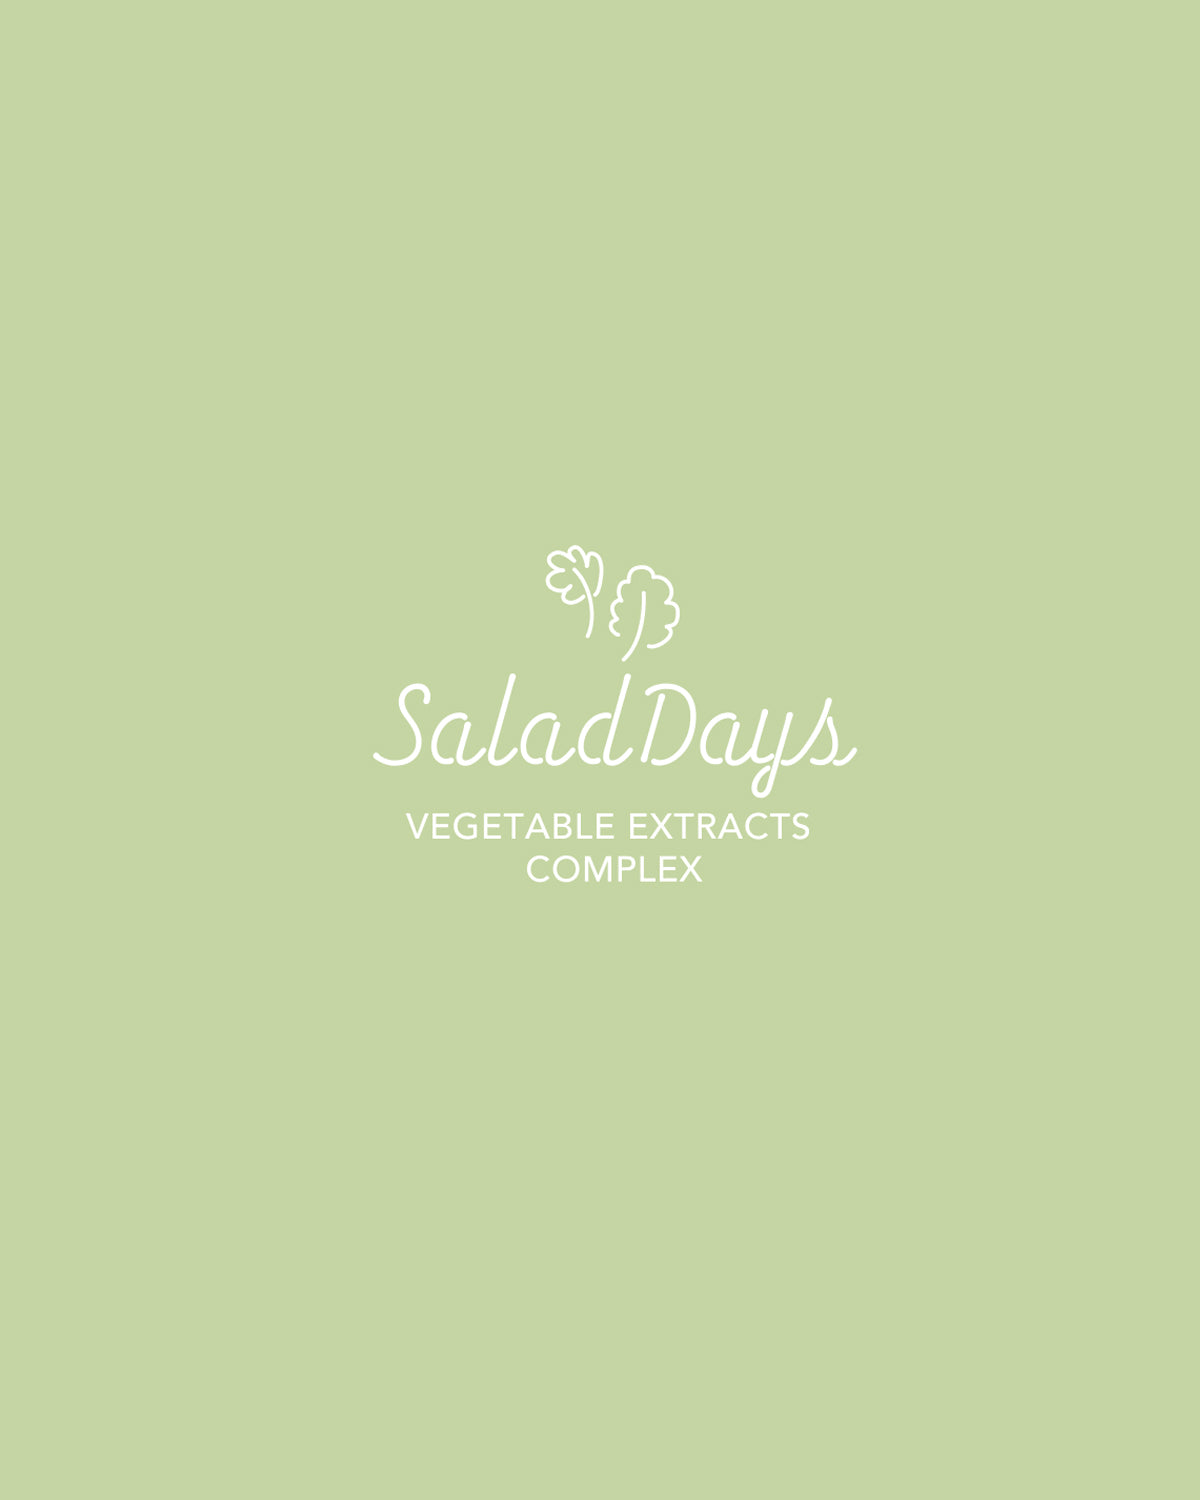 Salad Days!  A vitamin-enriched cleansing foam deeply cleanses and removes makeup, toxins, and impurities from the skin both day & night while hydrating the skin. Vegetable particles such as Kale and Whet help improve the appearance of skin elasticity and hydration for younger looking skin!